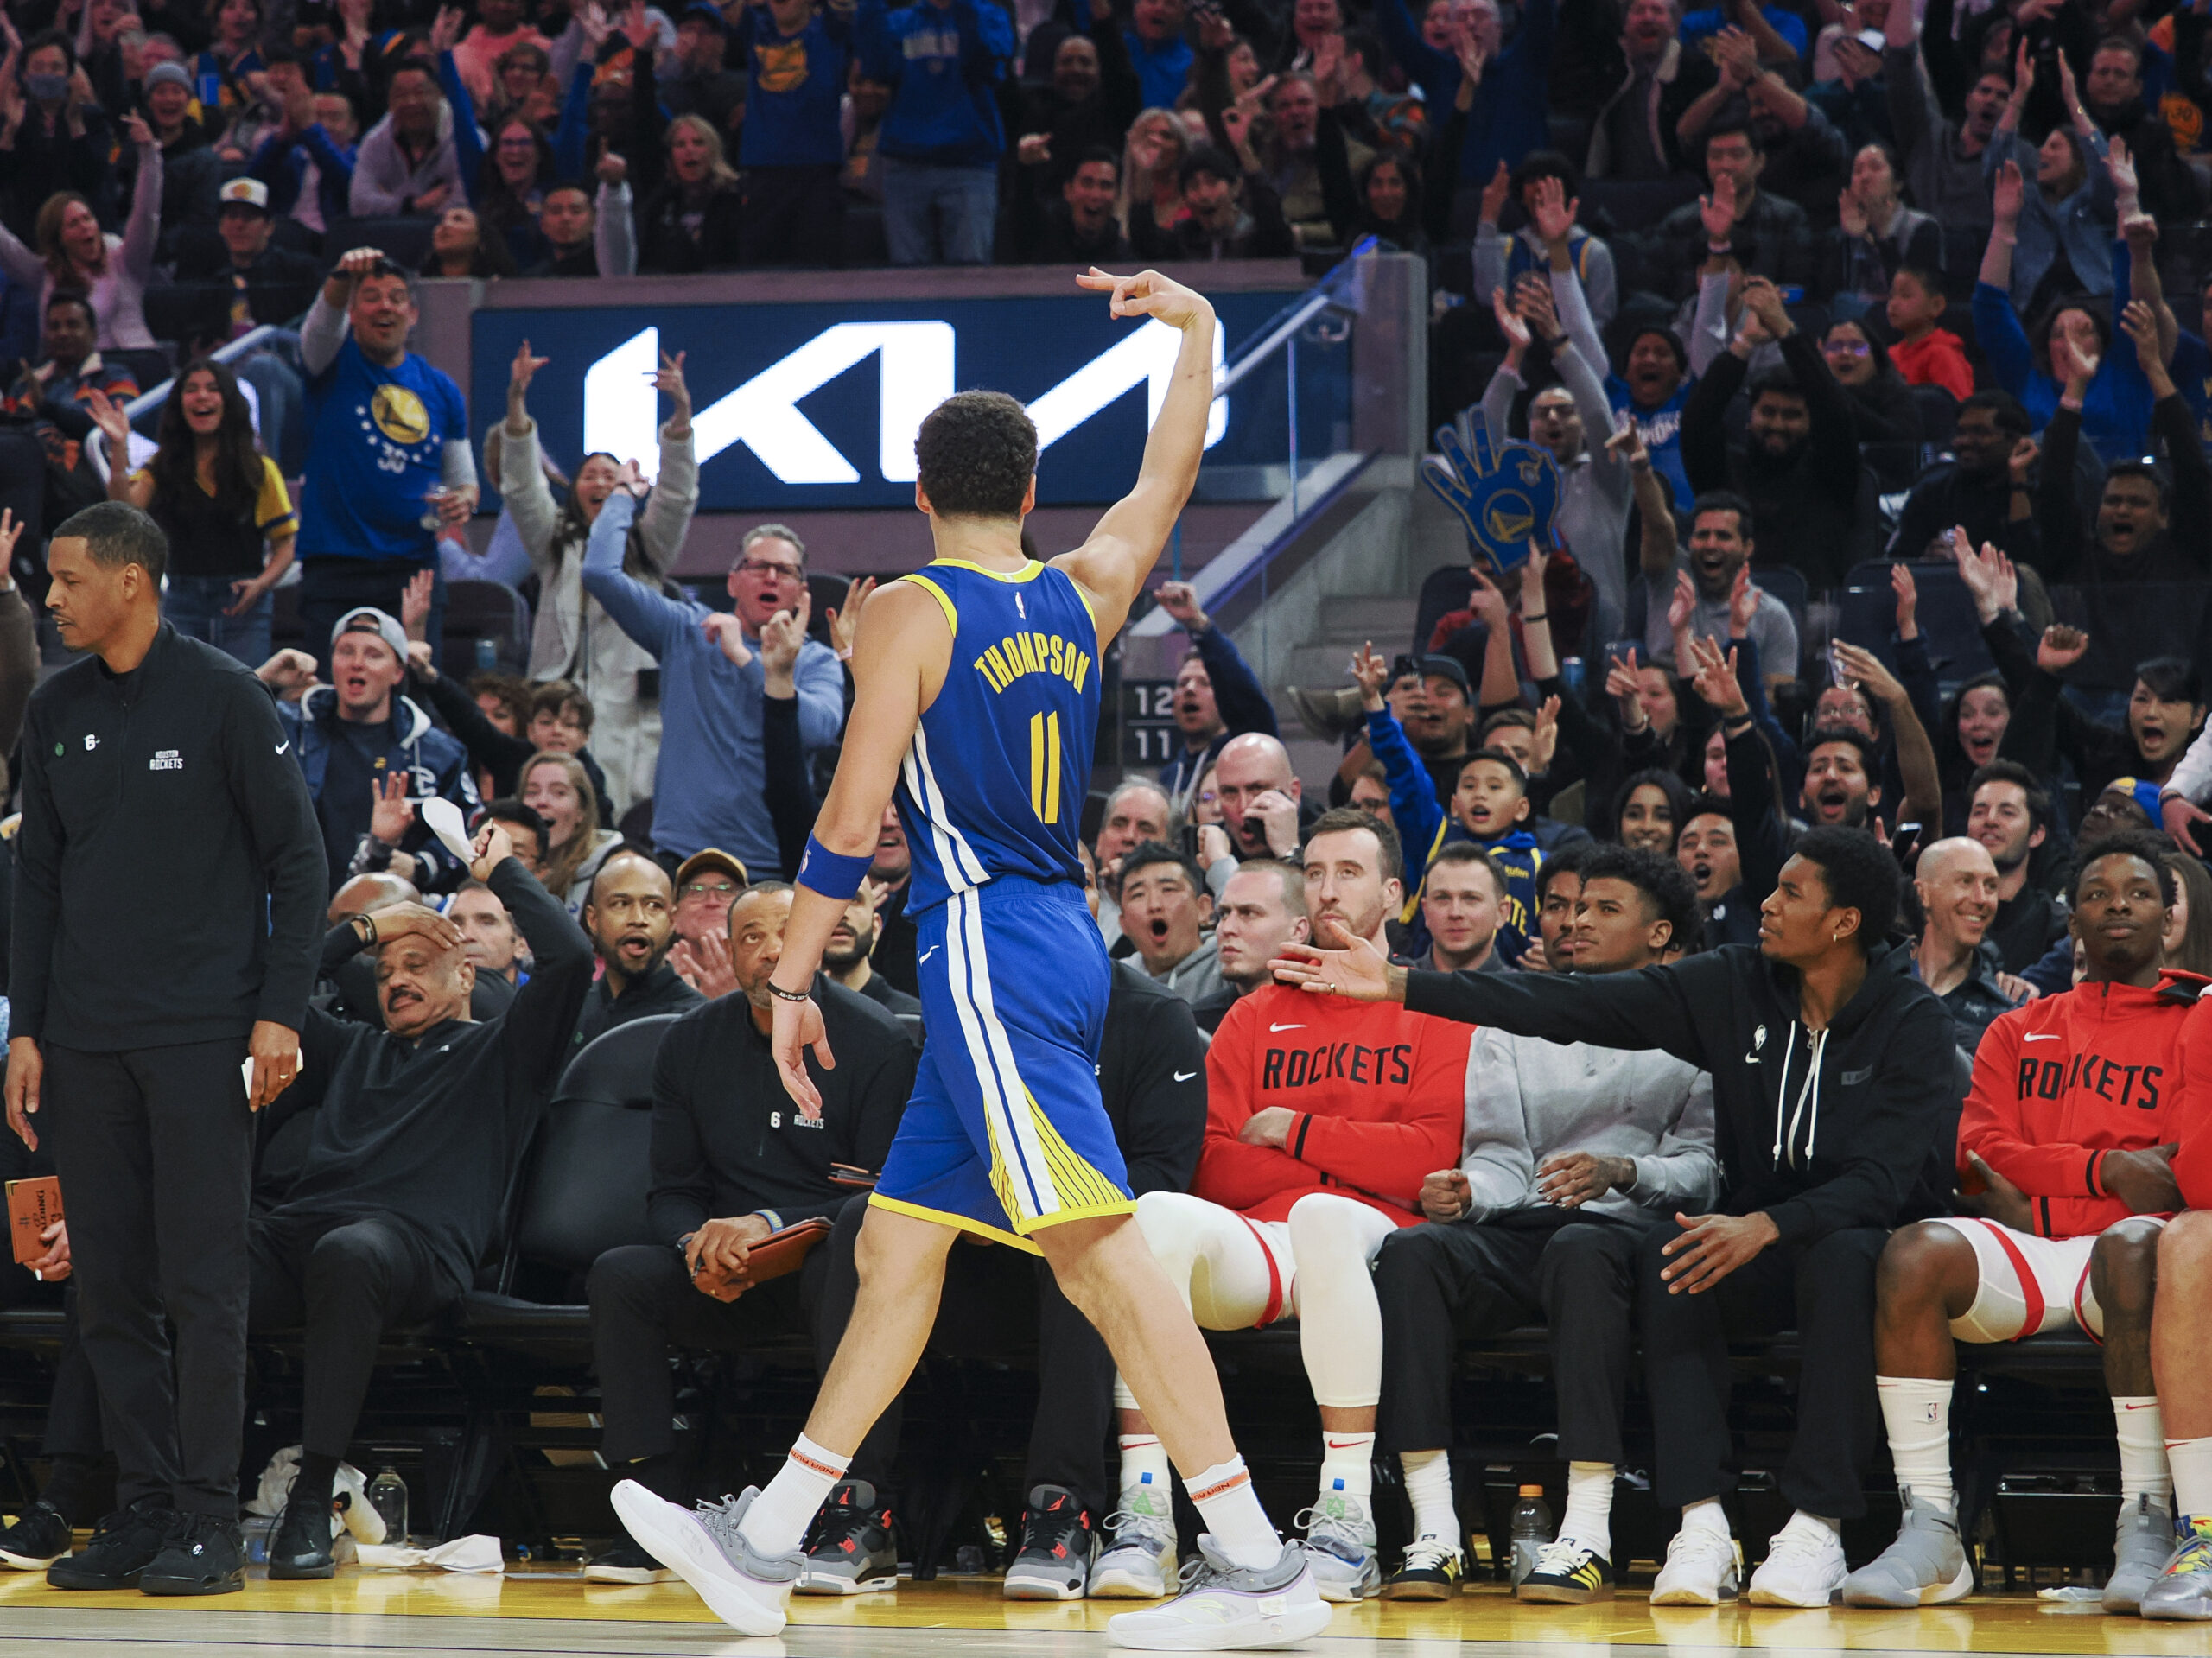 Highlights: Klay Thompson catches fire for 42 points with 12 made 3-pointers vs. Rockets